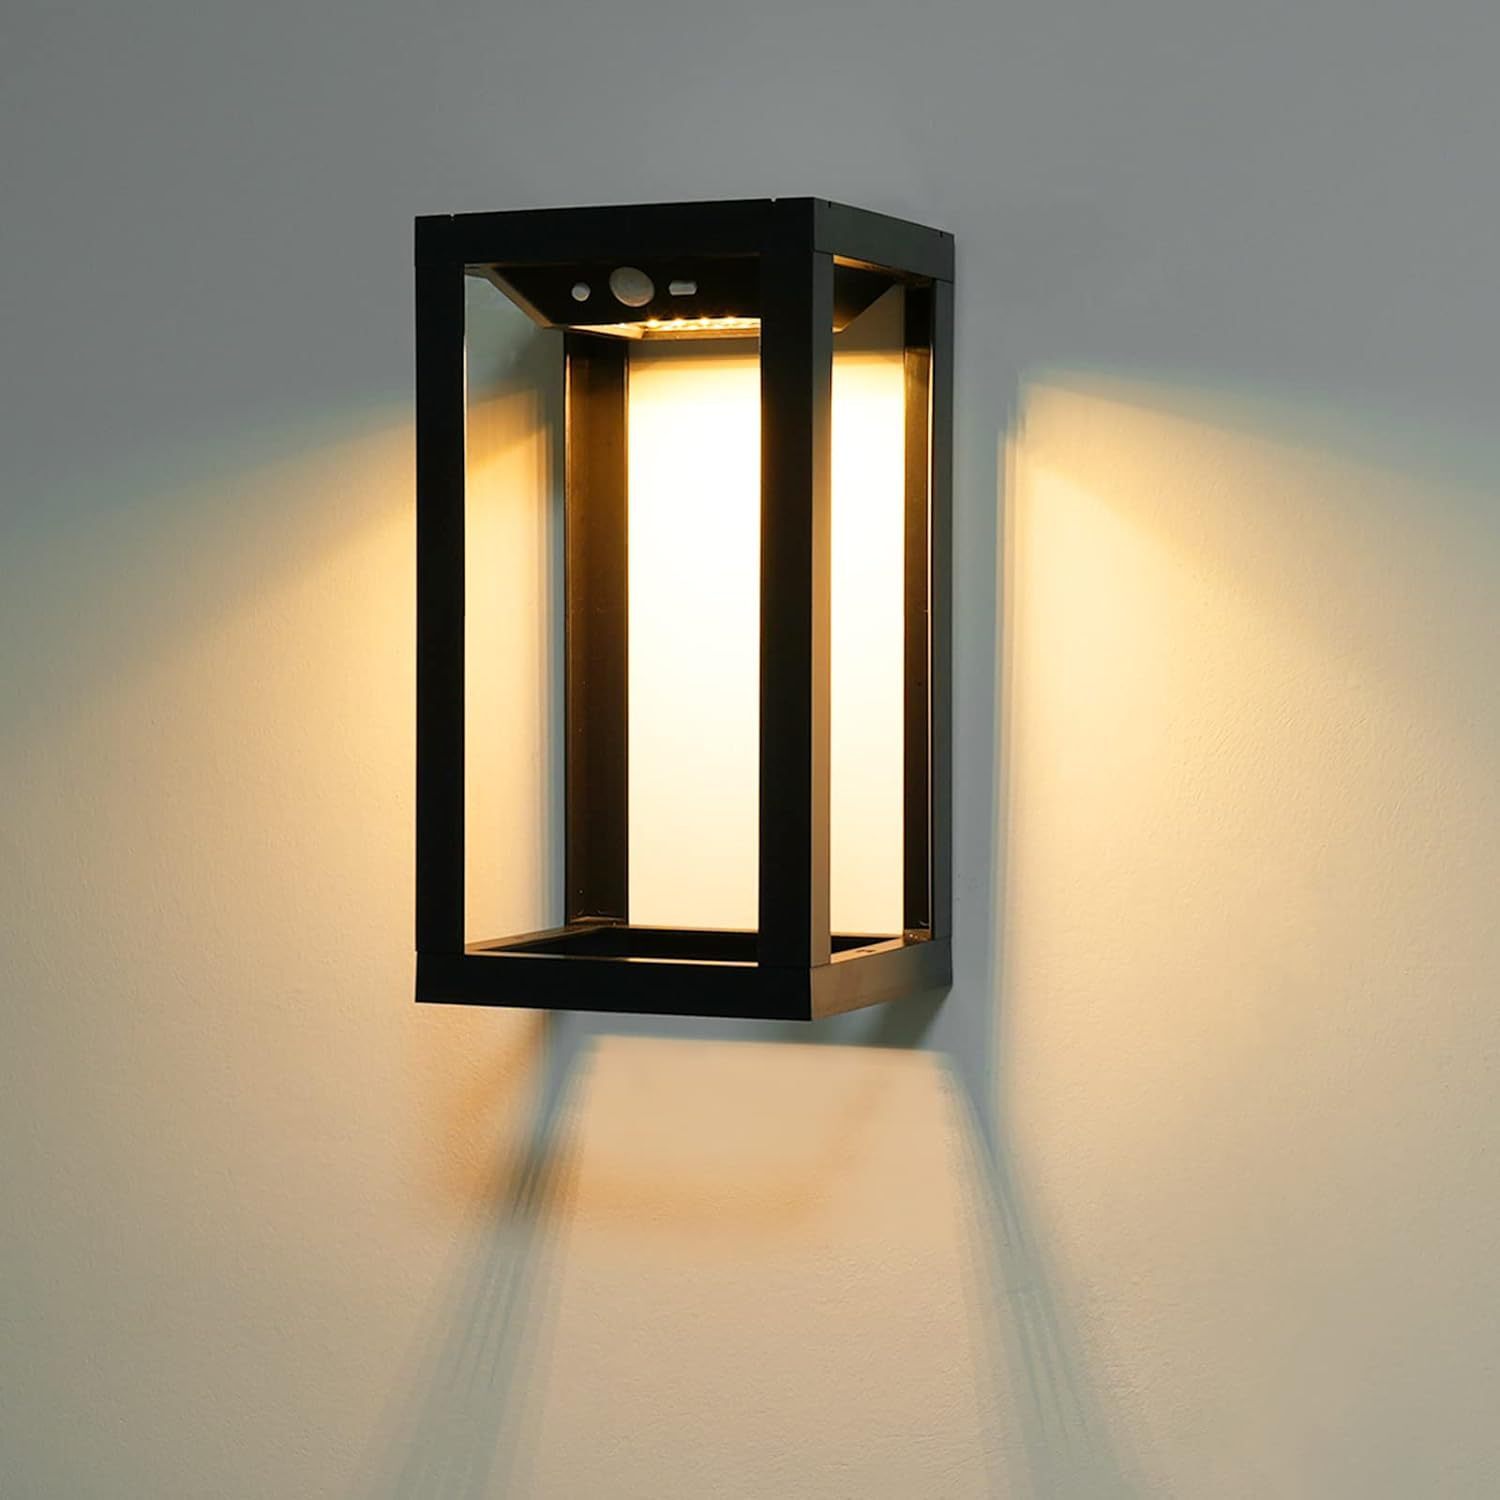 Two-color luminaire